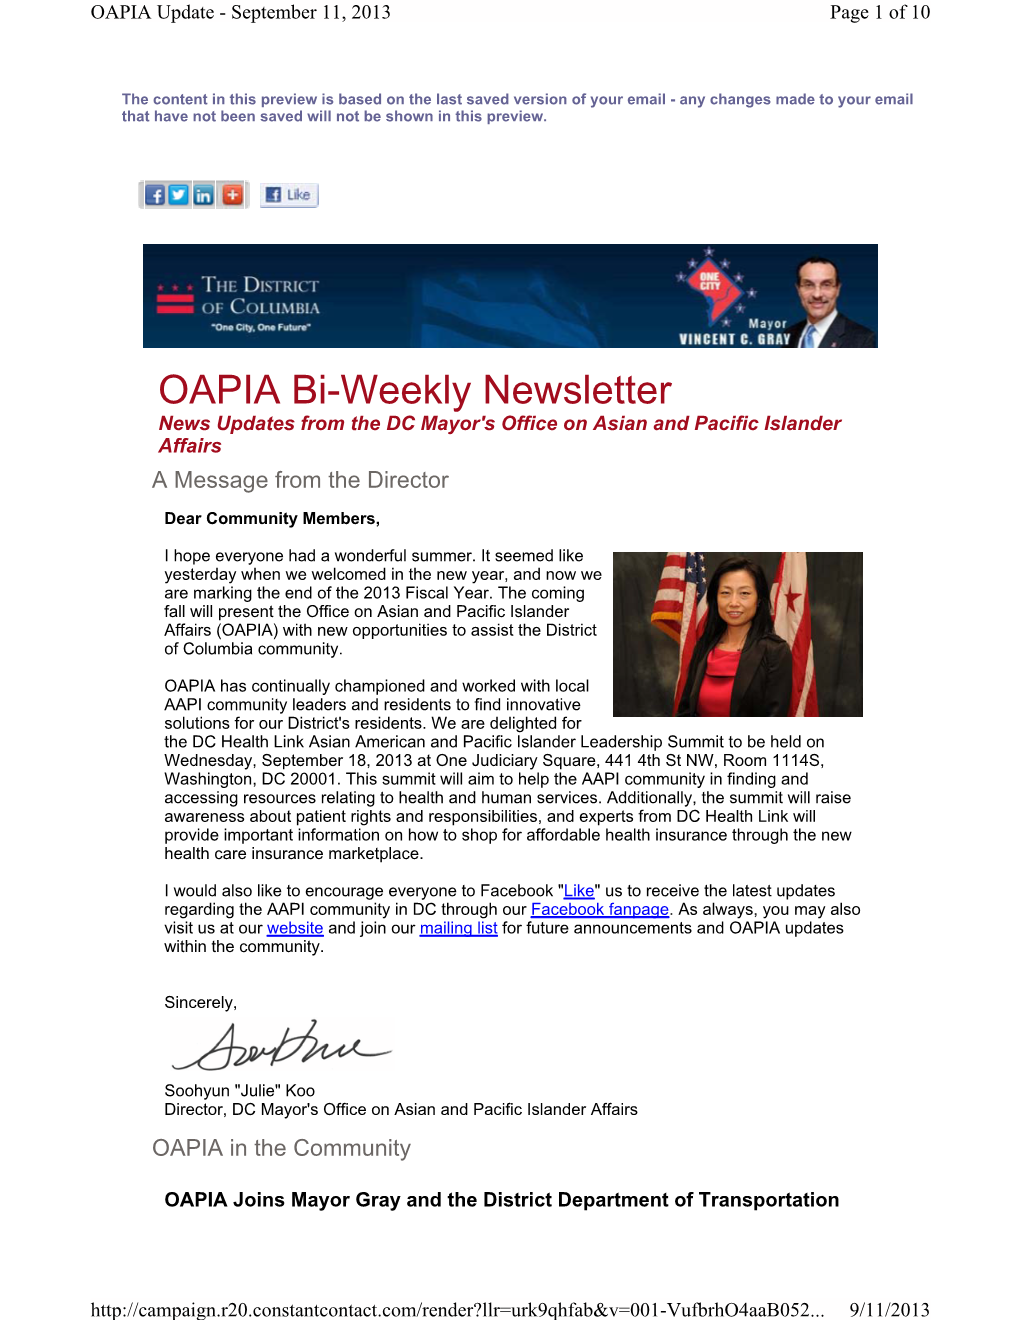 OAPIA Bi-Weekly Newsletter News Updates from the DC Mayor's Office on Asian and Pacific Islander Affairs a Message from the Director